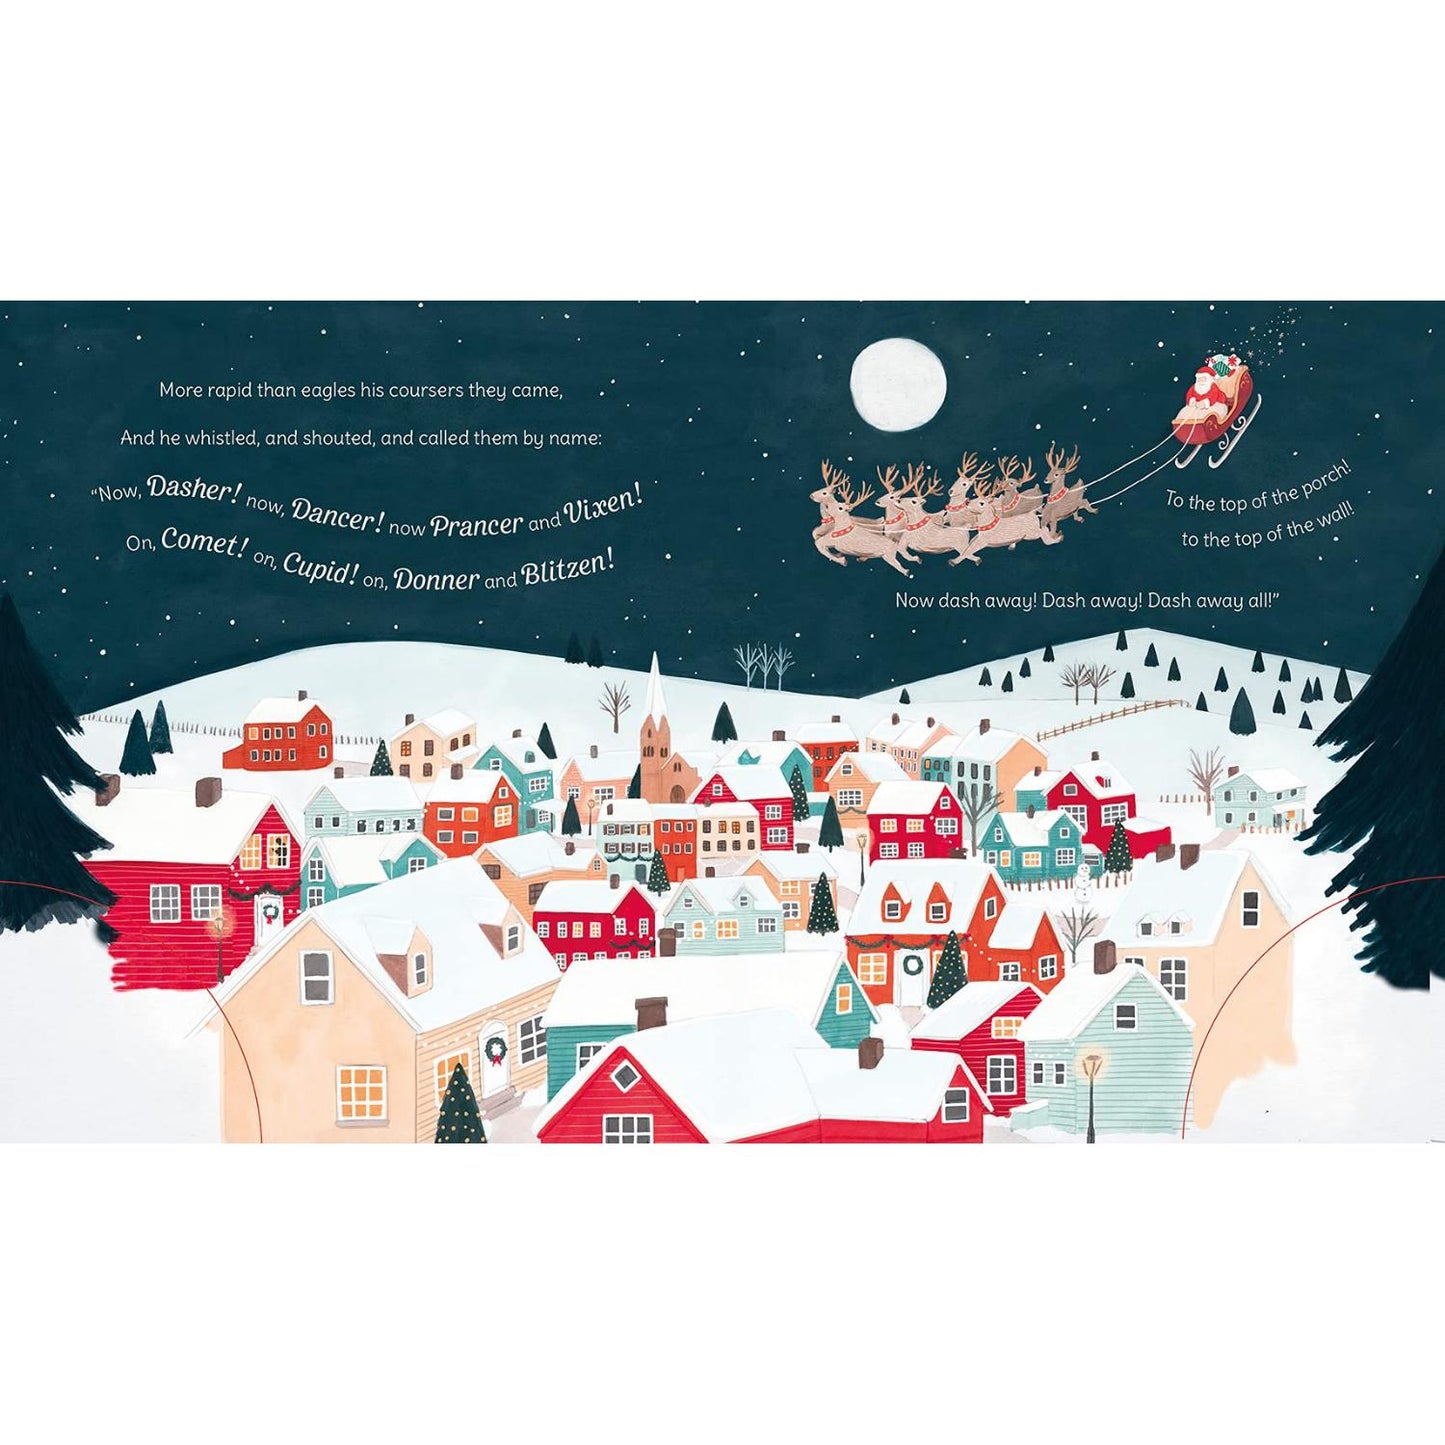 Twas the Night Before Christmas: Wind and Play! | Hardcover | Children’s Book on Christmas